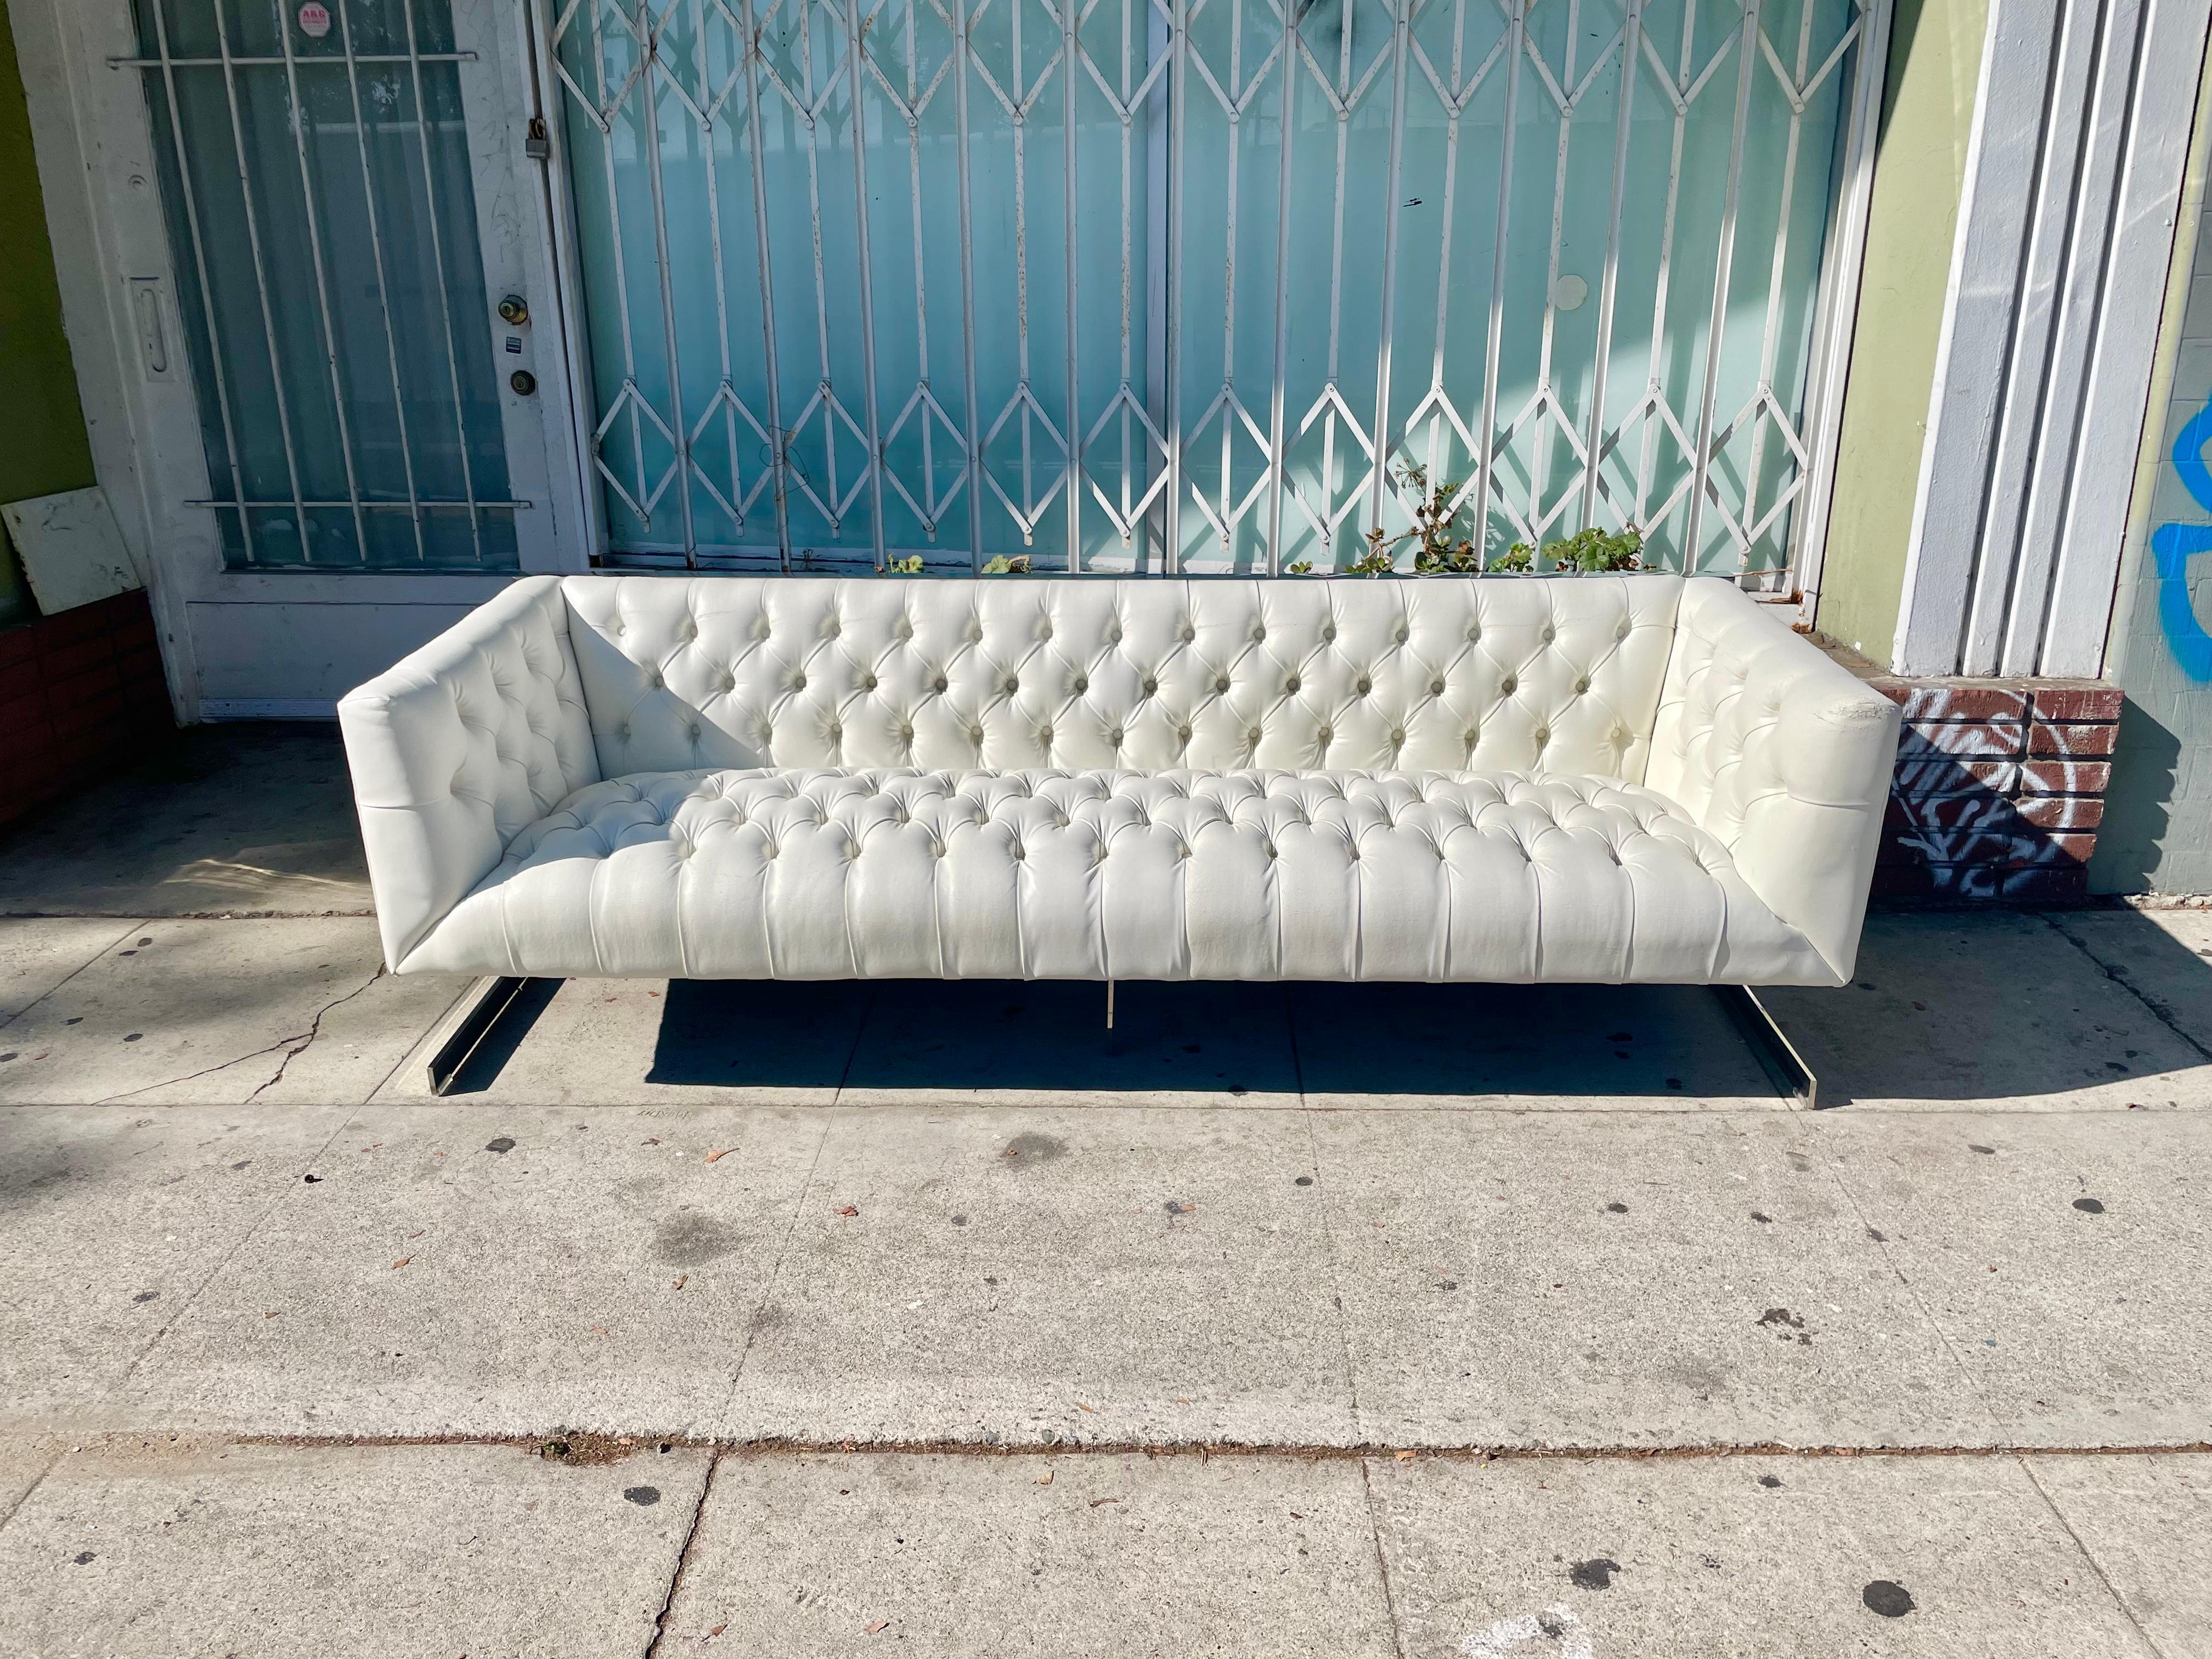 Vintage Leather and Chrome Chesterfield Sofa Styled After Milo Baughman was designed and manufactured in the United States circa 1970s. This beautiful sofa features a white leather upholstery that sits on top of a strong and sturdy pair of chrome